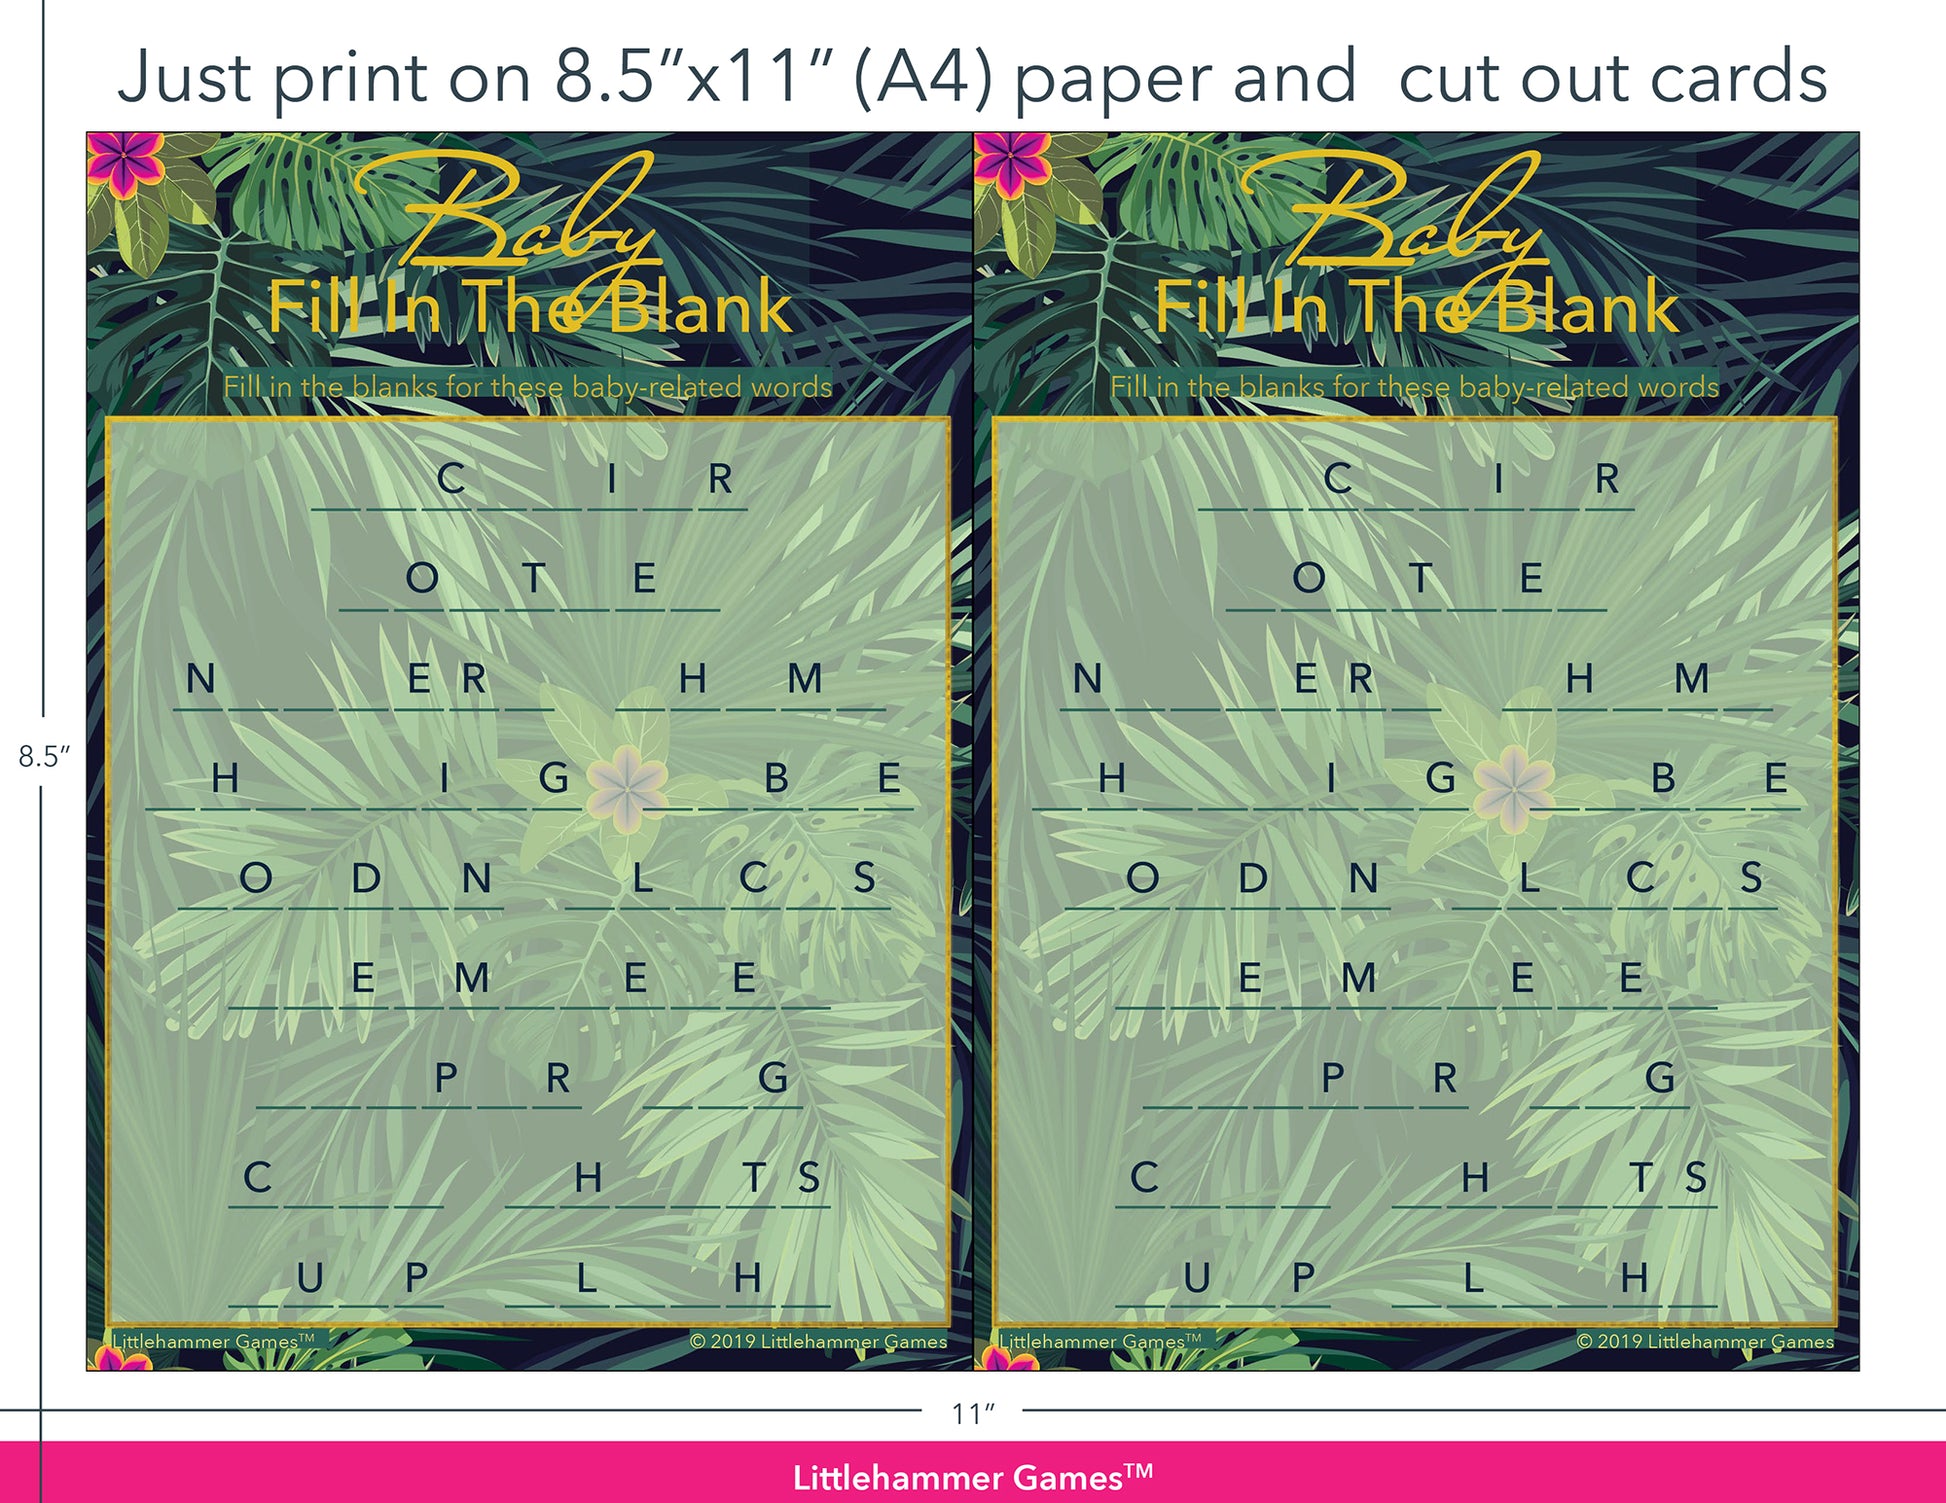 Baby Fill in the Blank tropical game cards with printing instructions